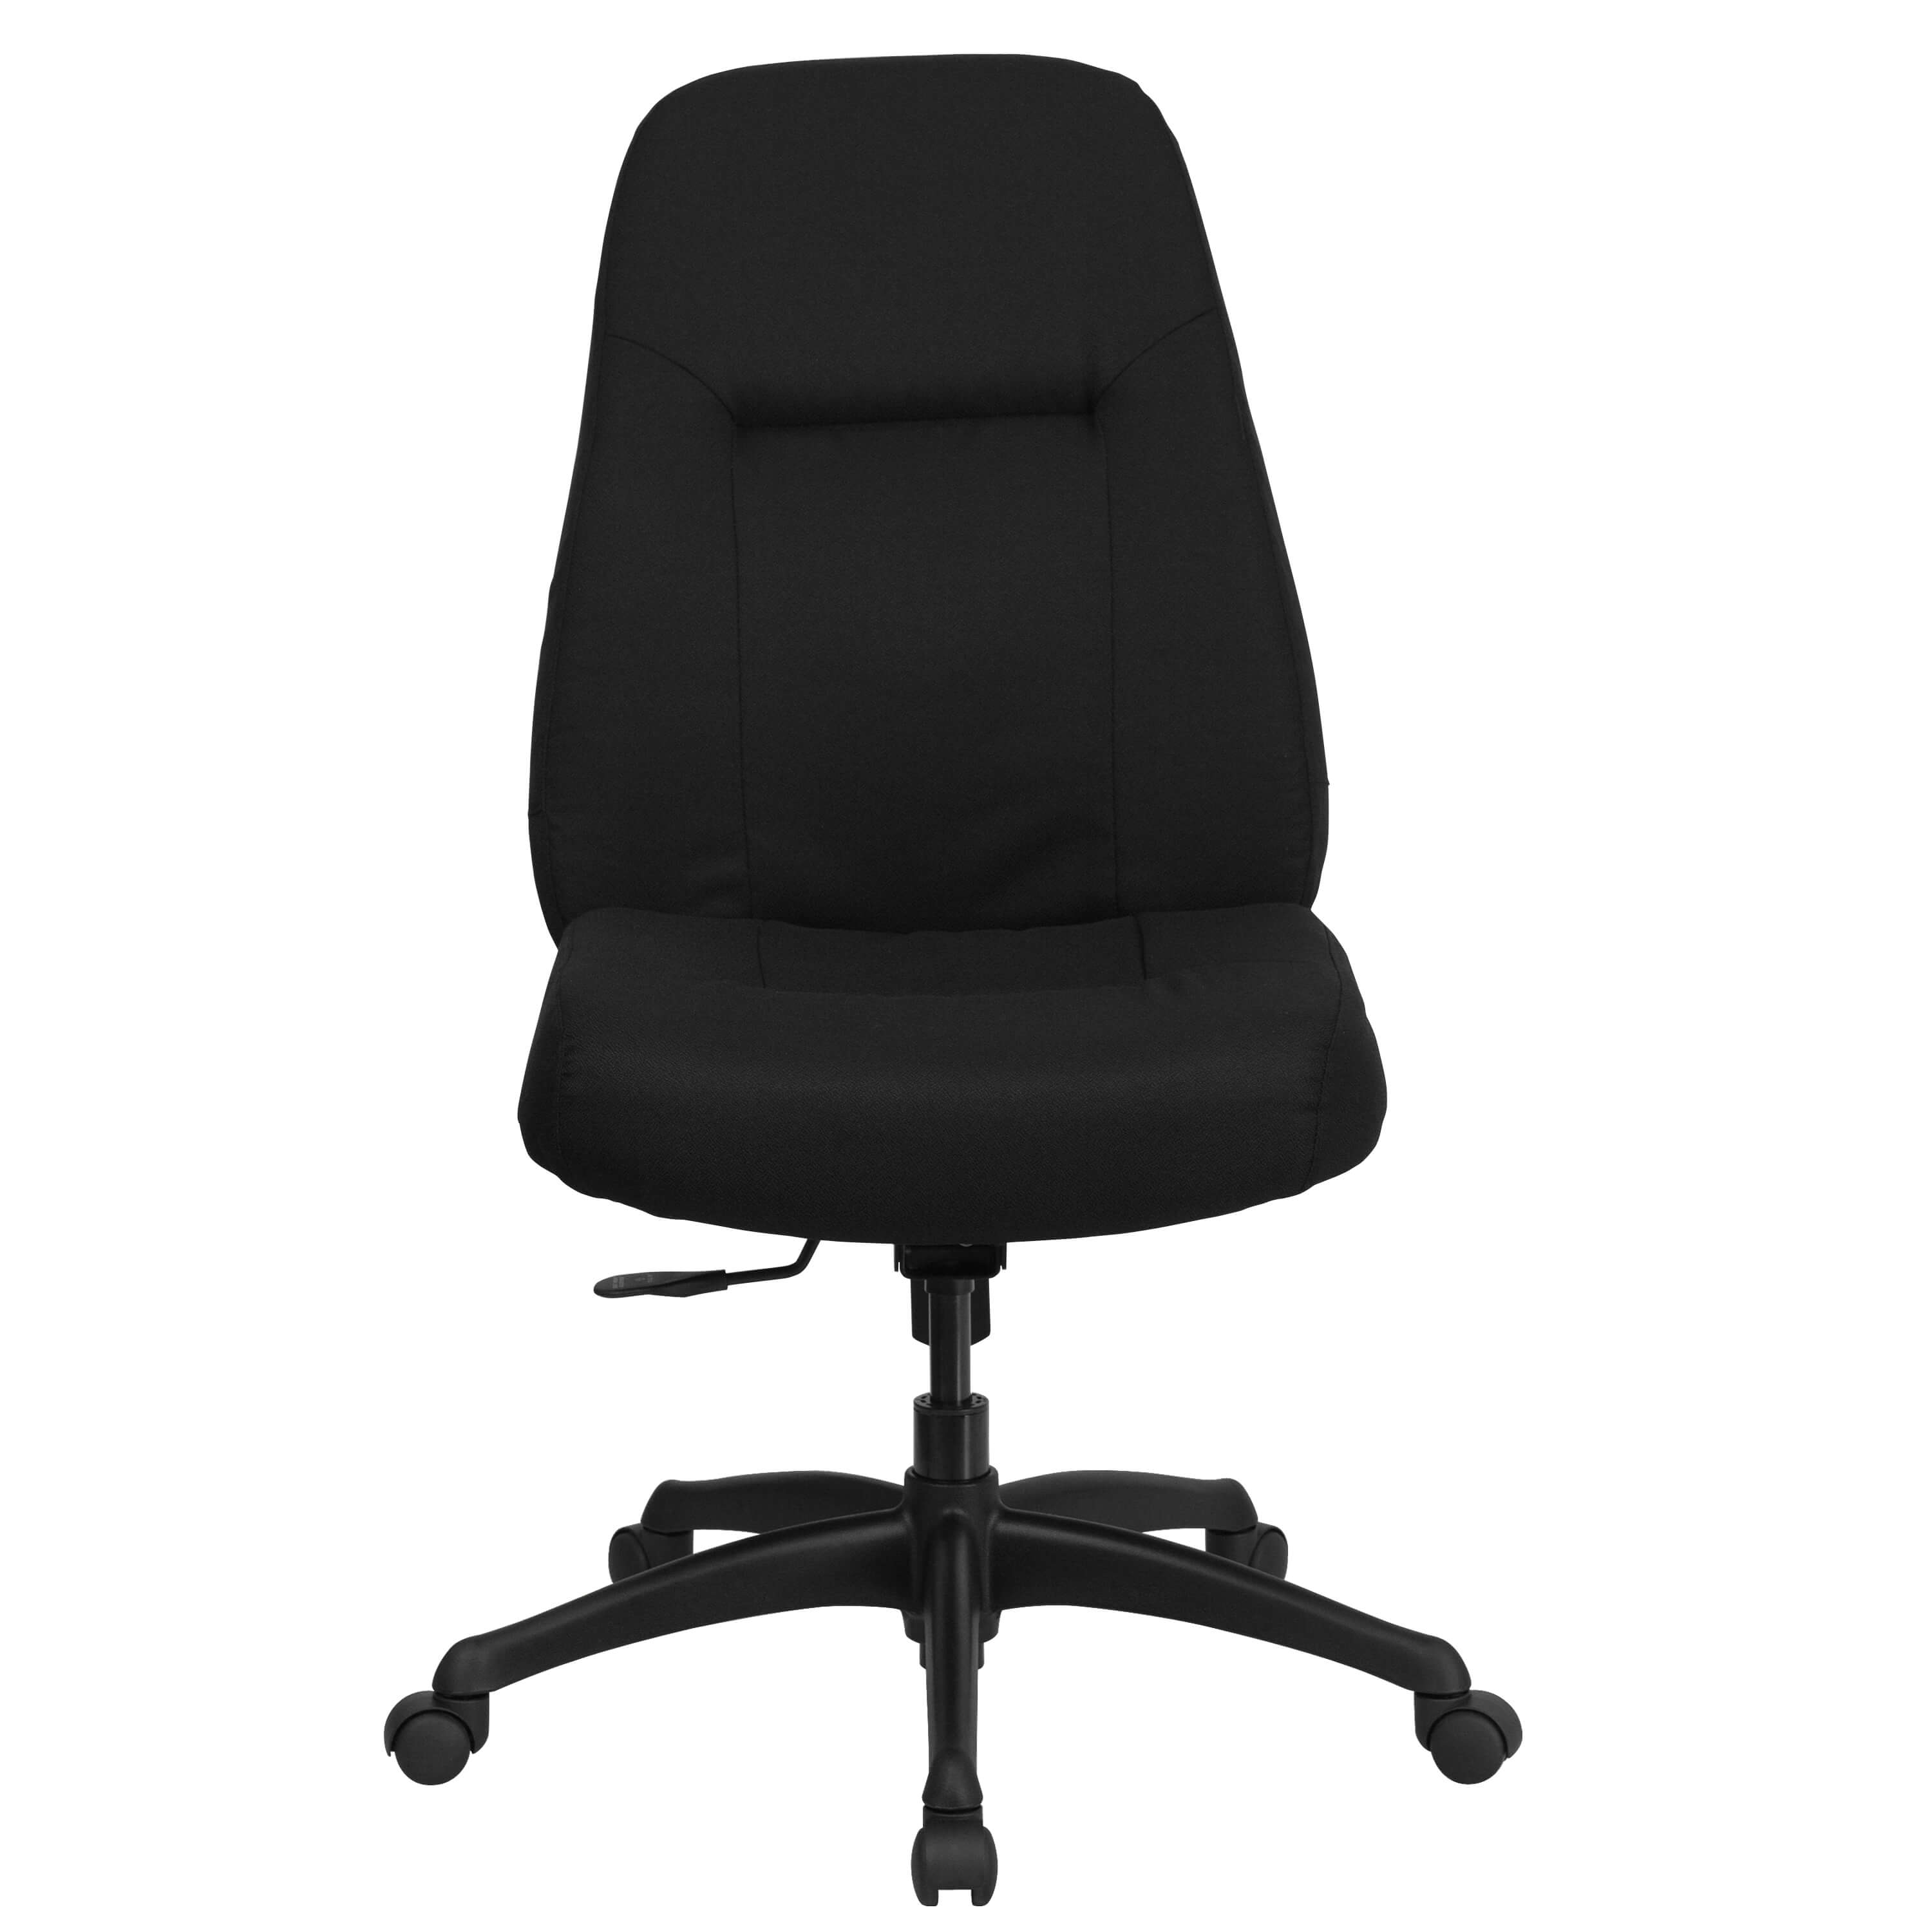 400 lb capacity office chair front view